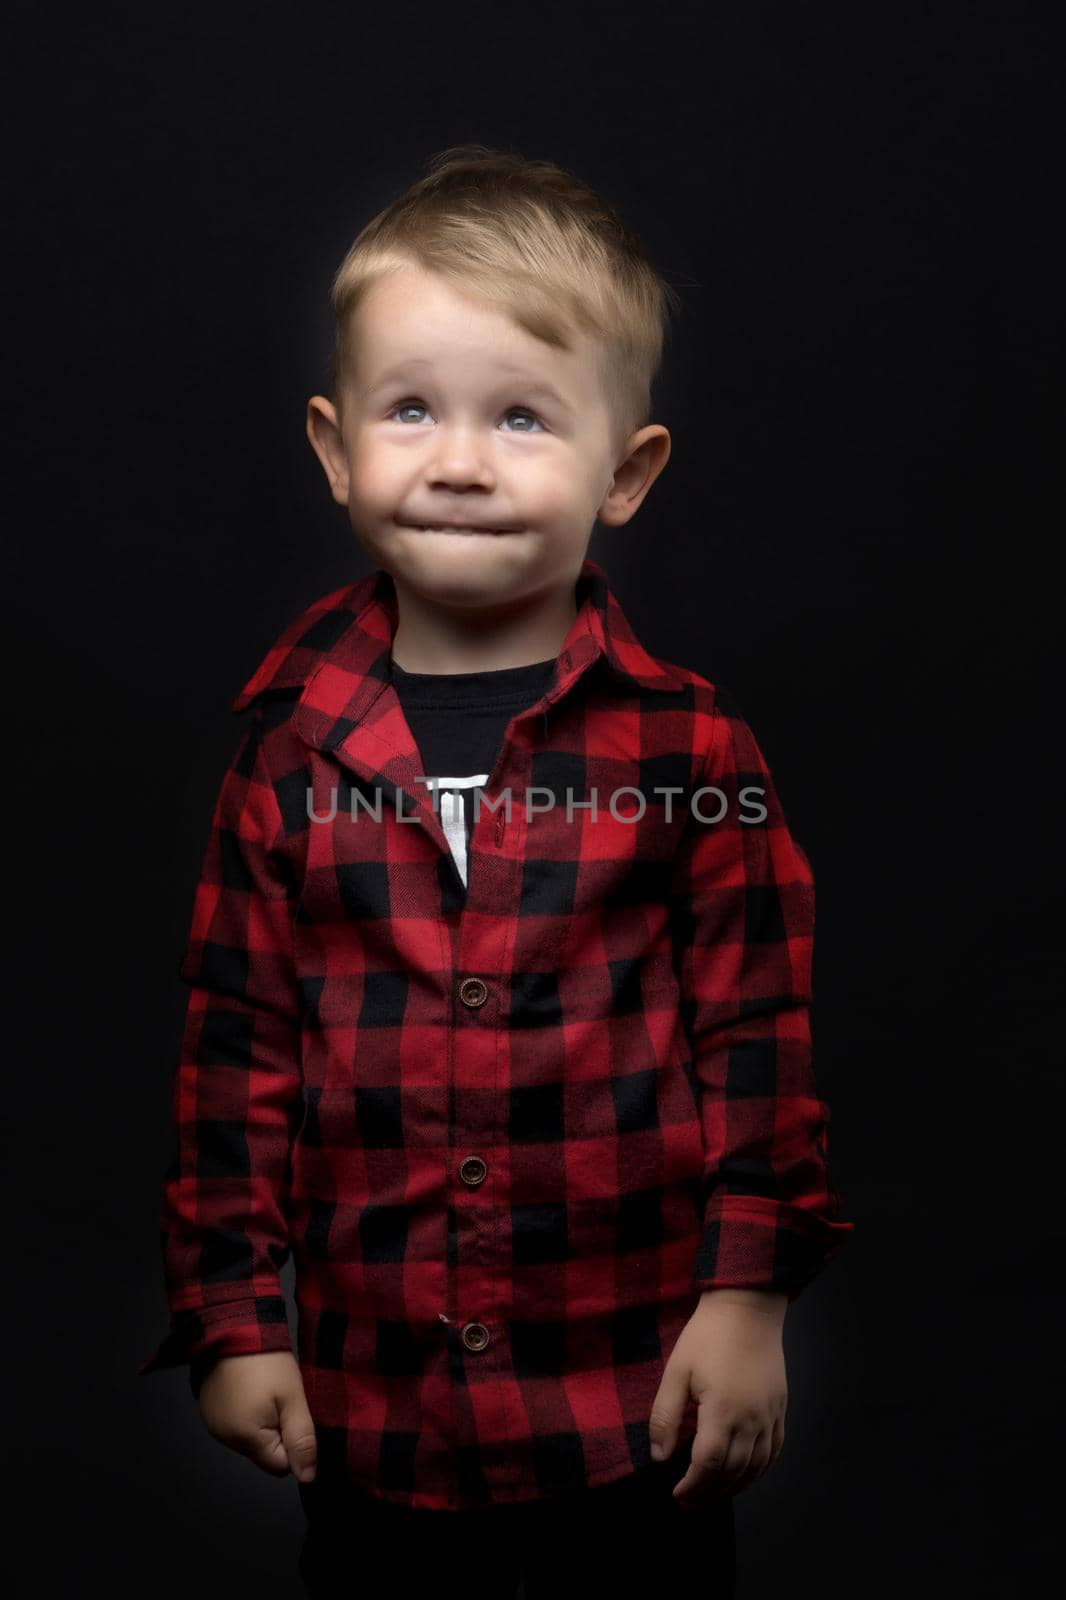 Cute little boy in studio on a black background. Concept Happy childhood, beauty and people.